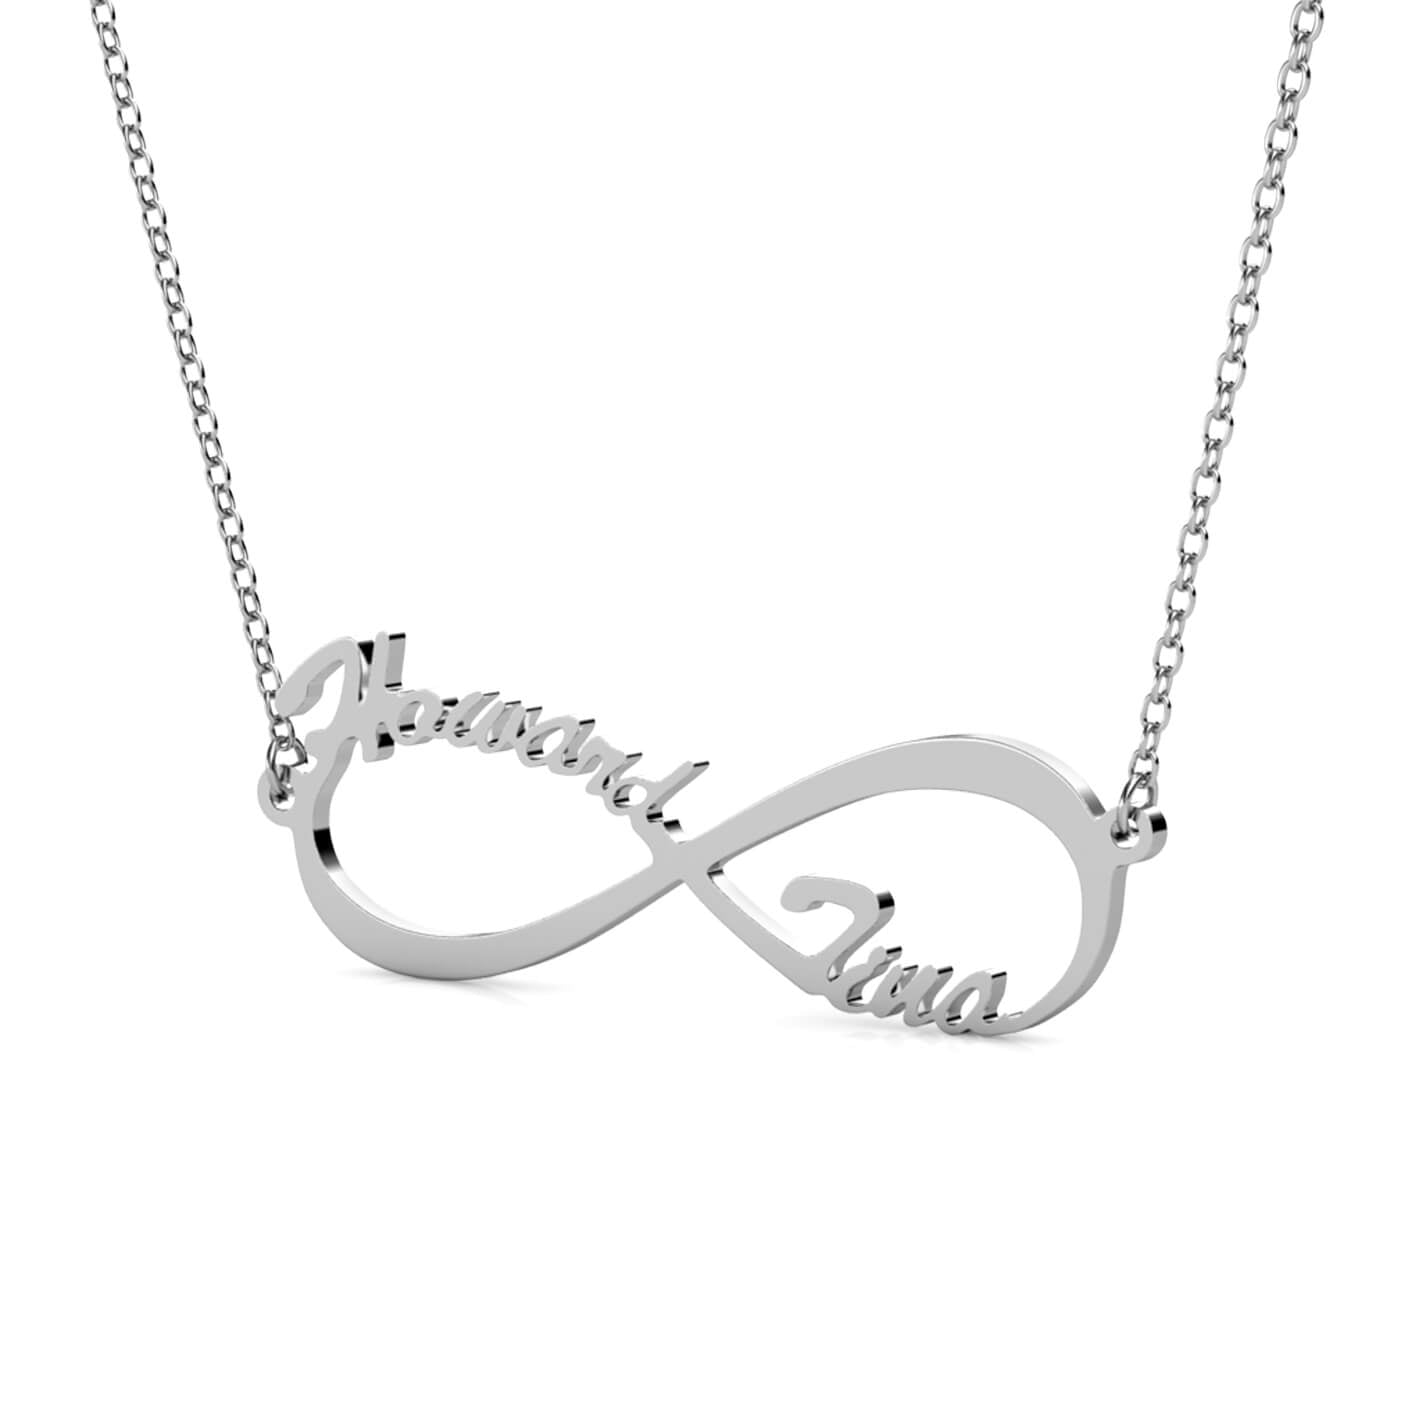 Infinity 2 Name Necklace